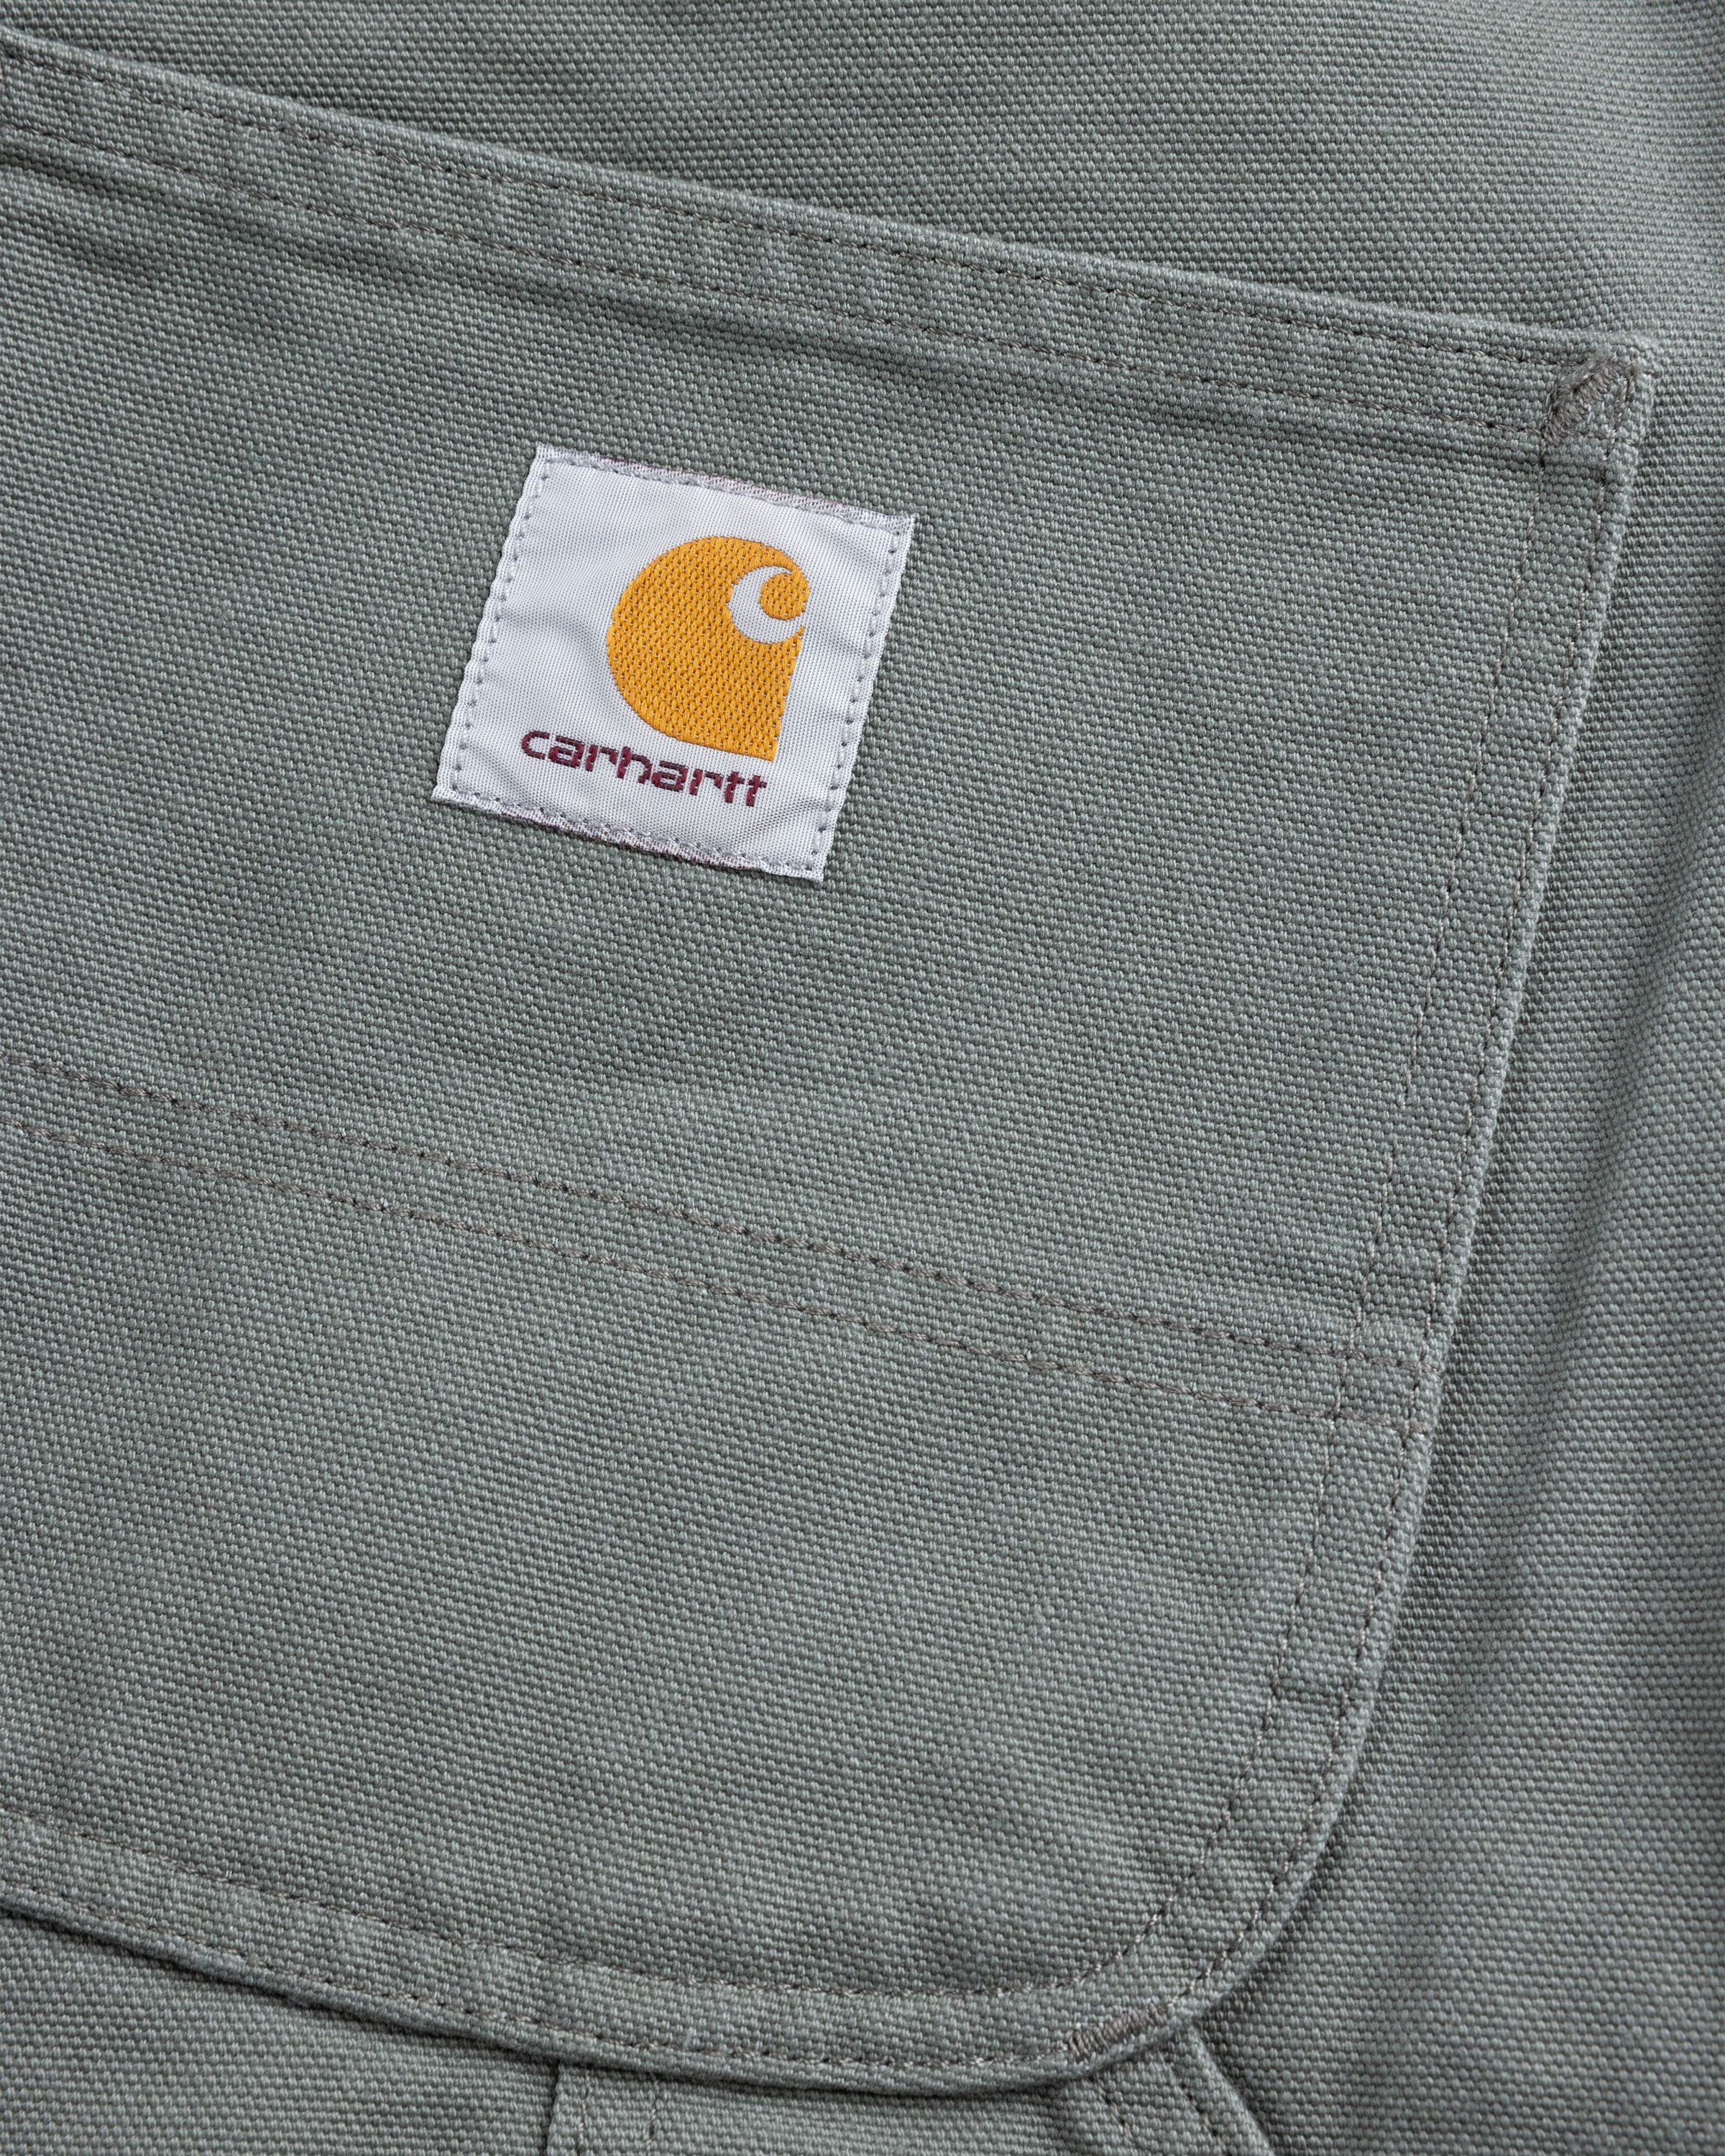 Carhartt WIP - Double Knee Pant Green - Clothing - Green - Image 7